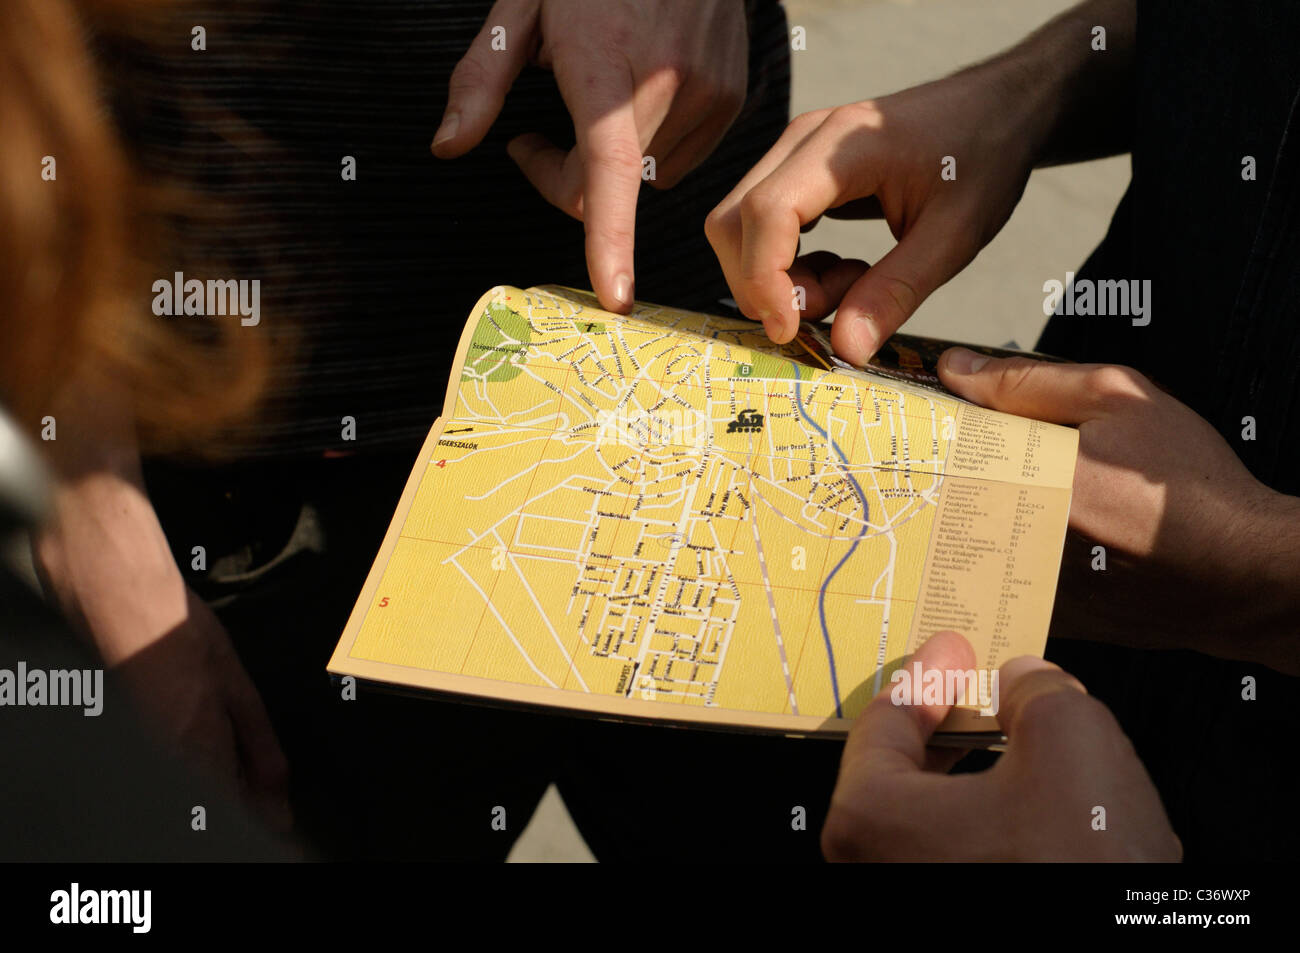 Lost tourists consult a map. Stock Photo